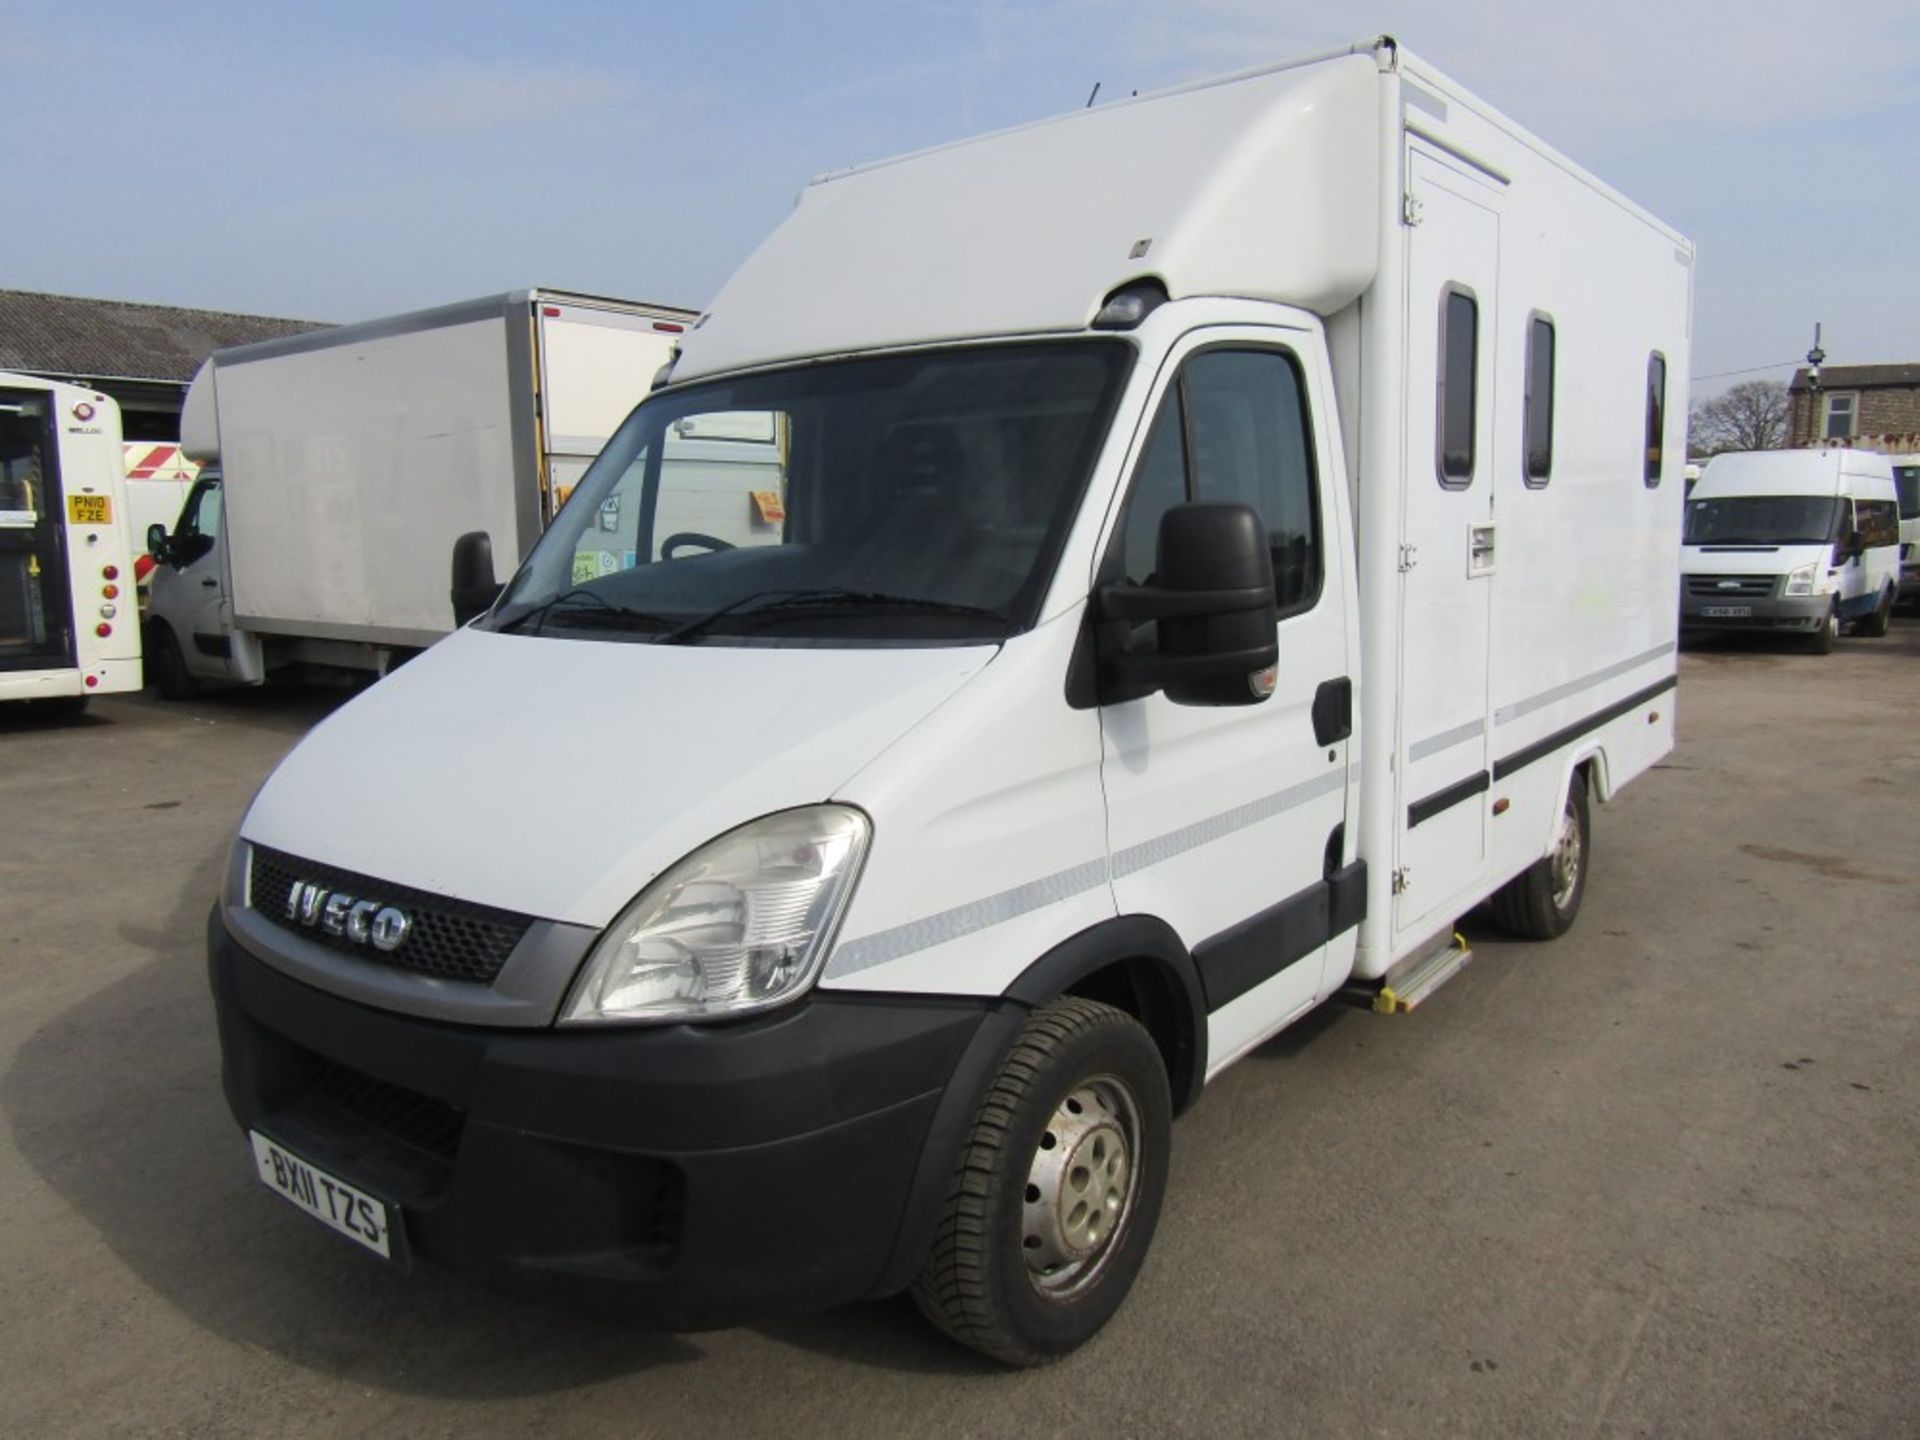 11 reg IVECO DAILY 35S13 MWB 2.3 PRISON VAN, 1ST REG 08/11, 228877M WARRANTED, V5 HERE, 1 OWNER FROM - Image 2 of 8